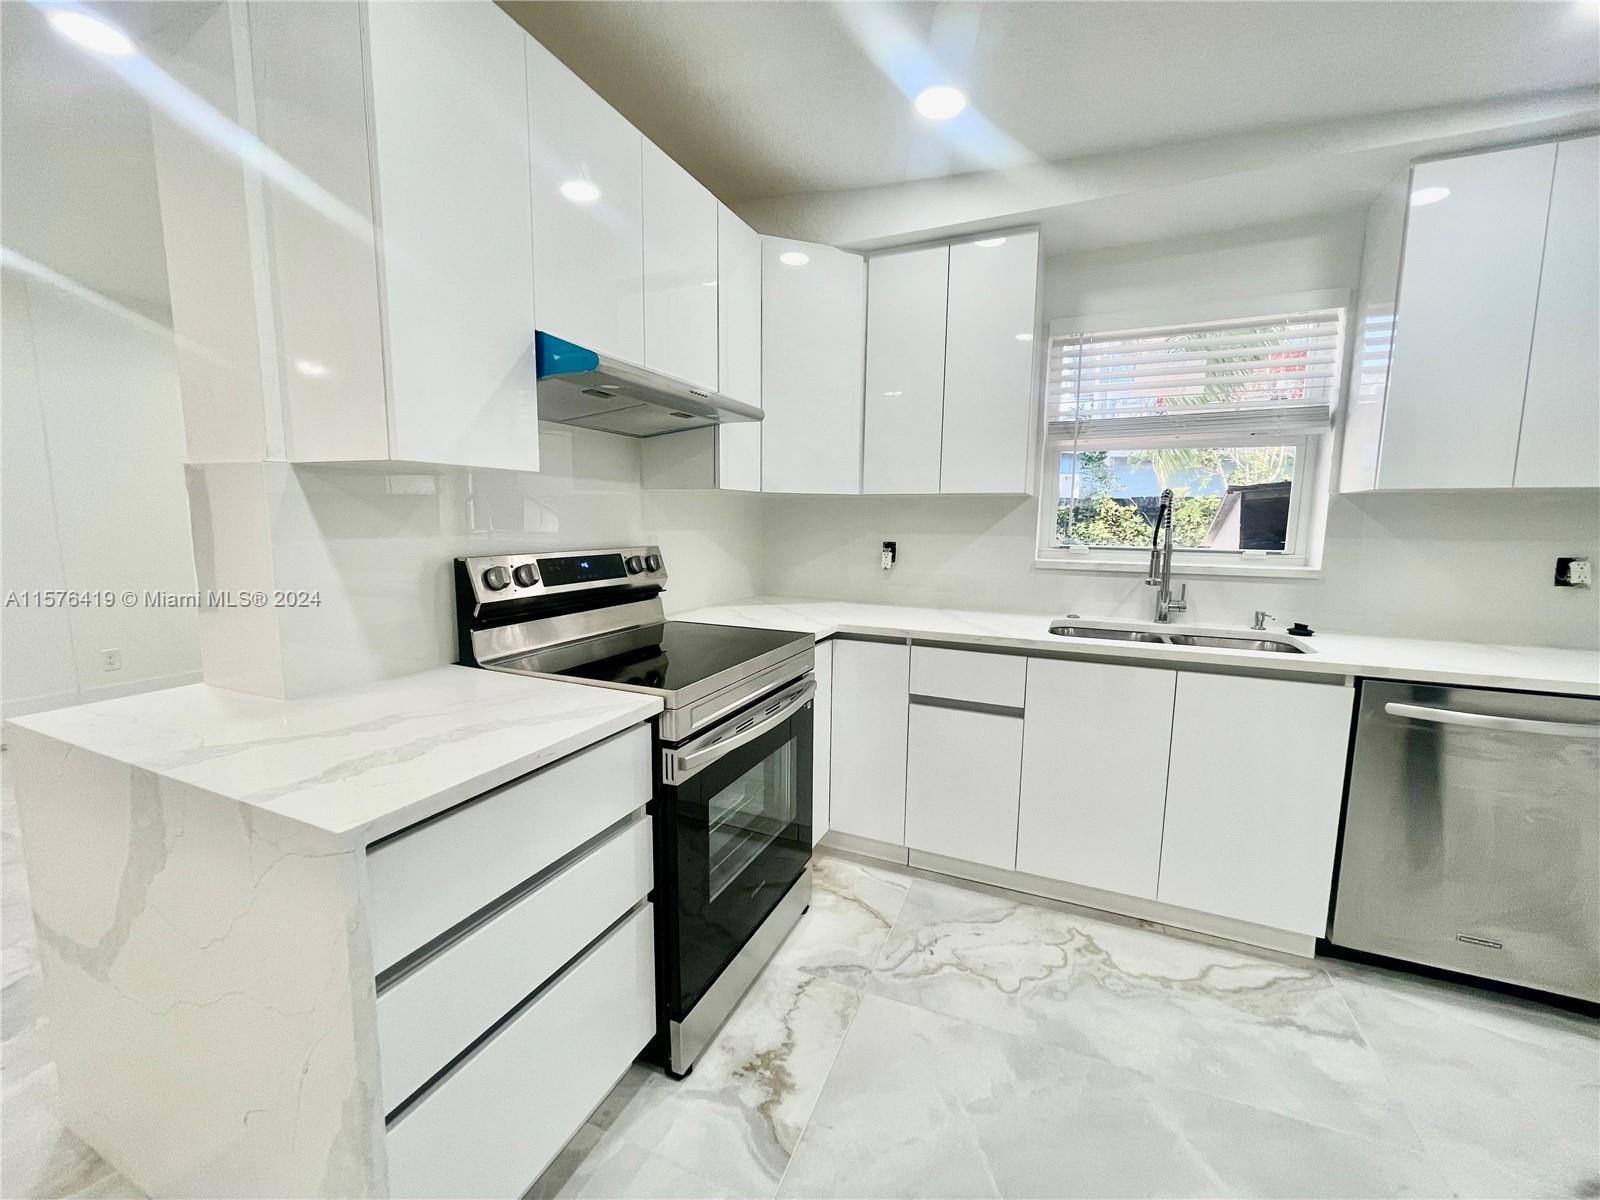 Photo of 1649 NE 8th Ave #1649 in Fort Lauderdale, FL